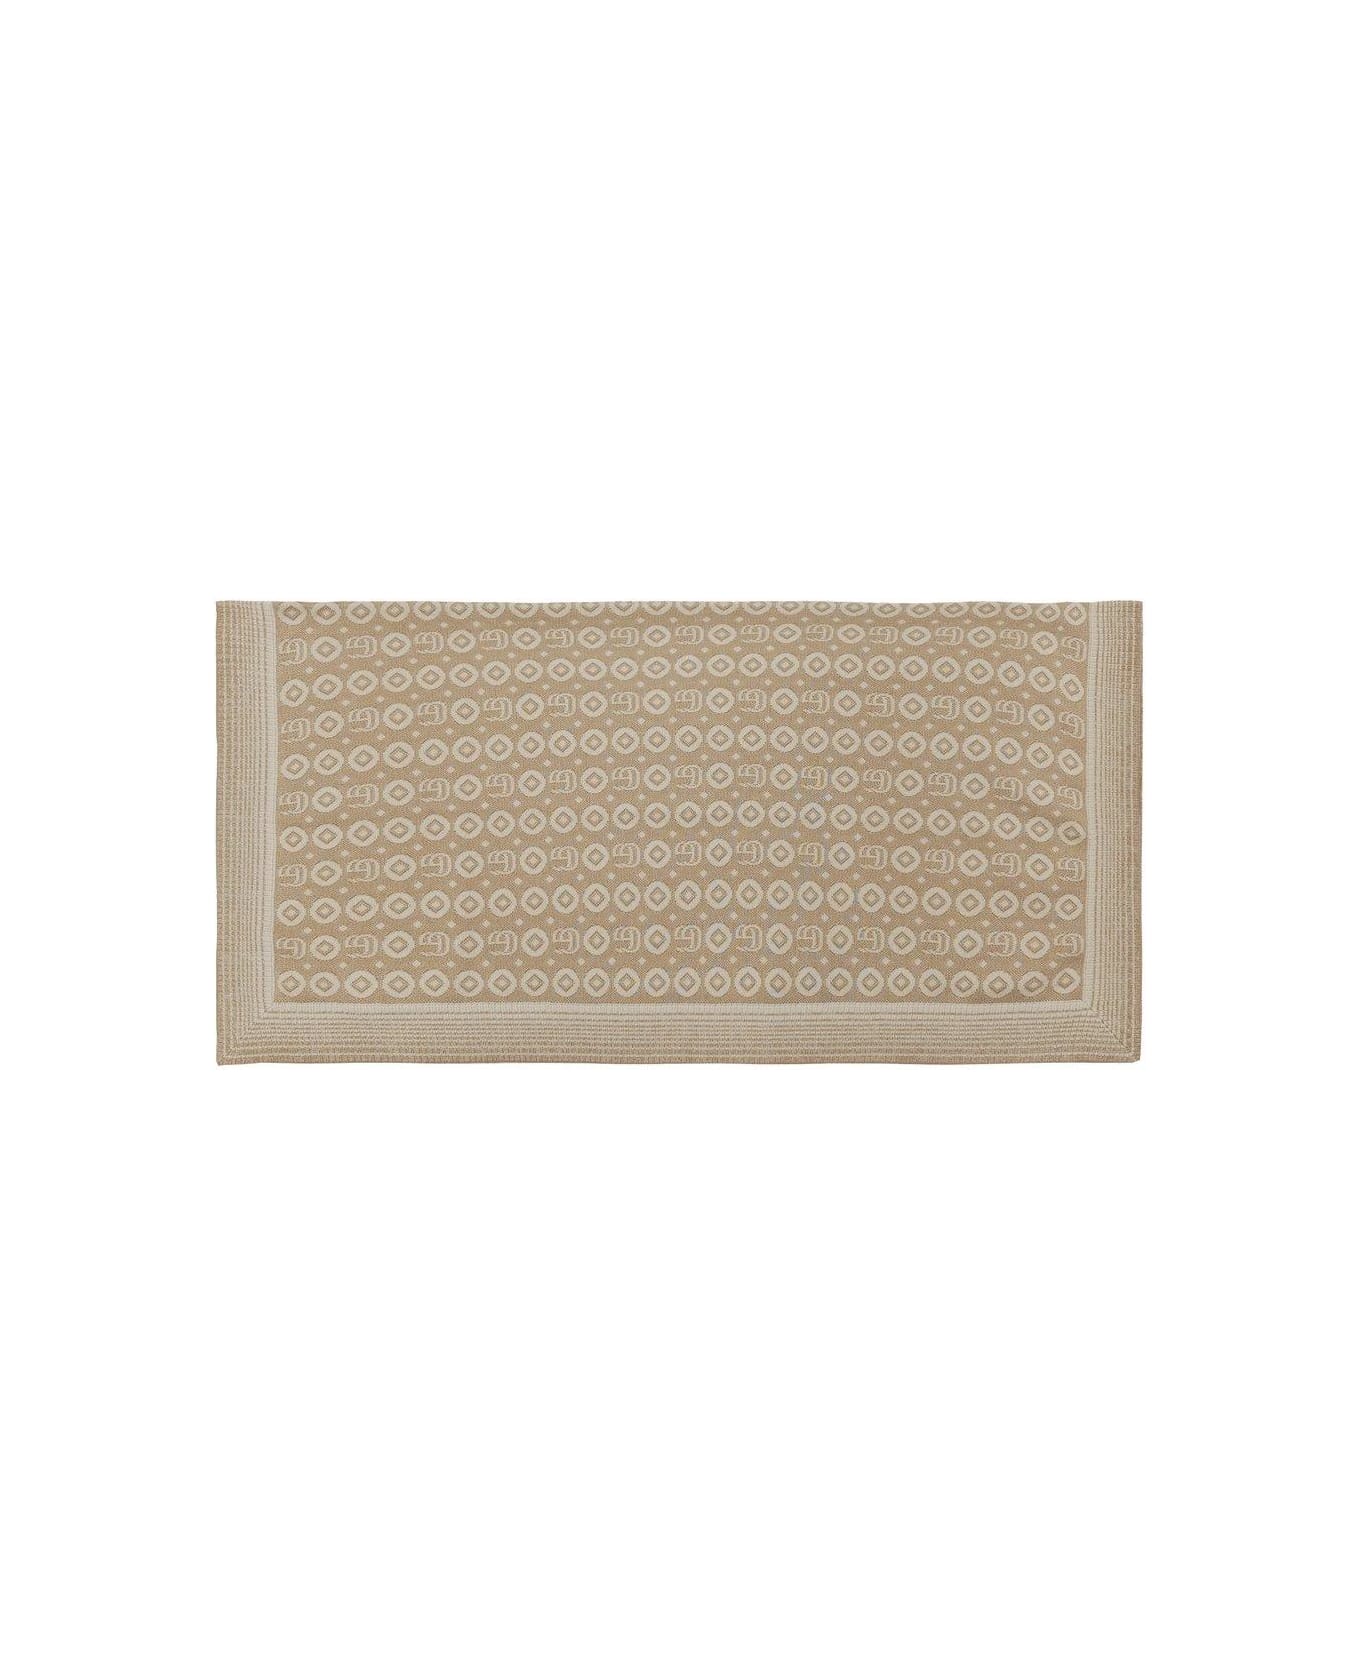 Gucci Logo Patch Blanket - Ivory